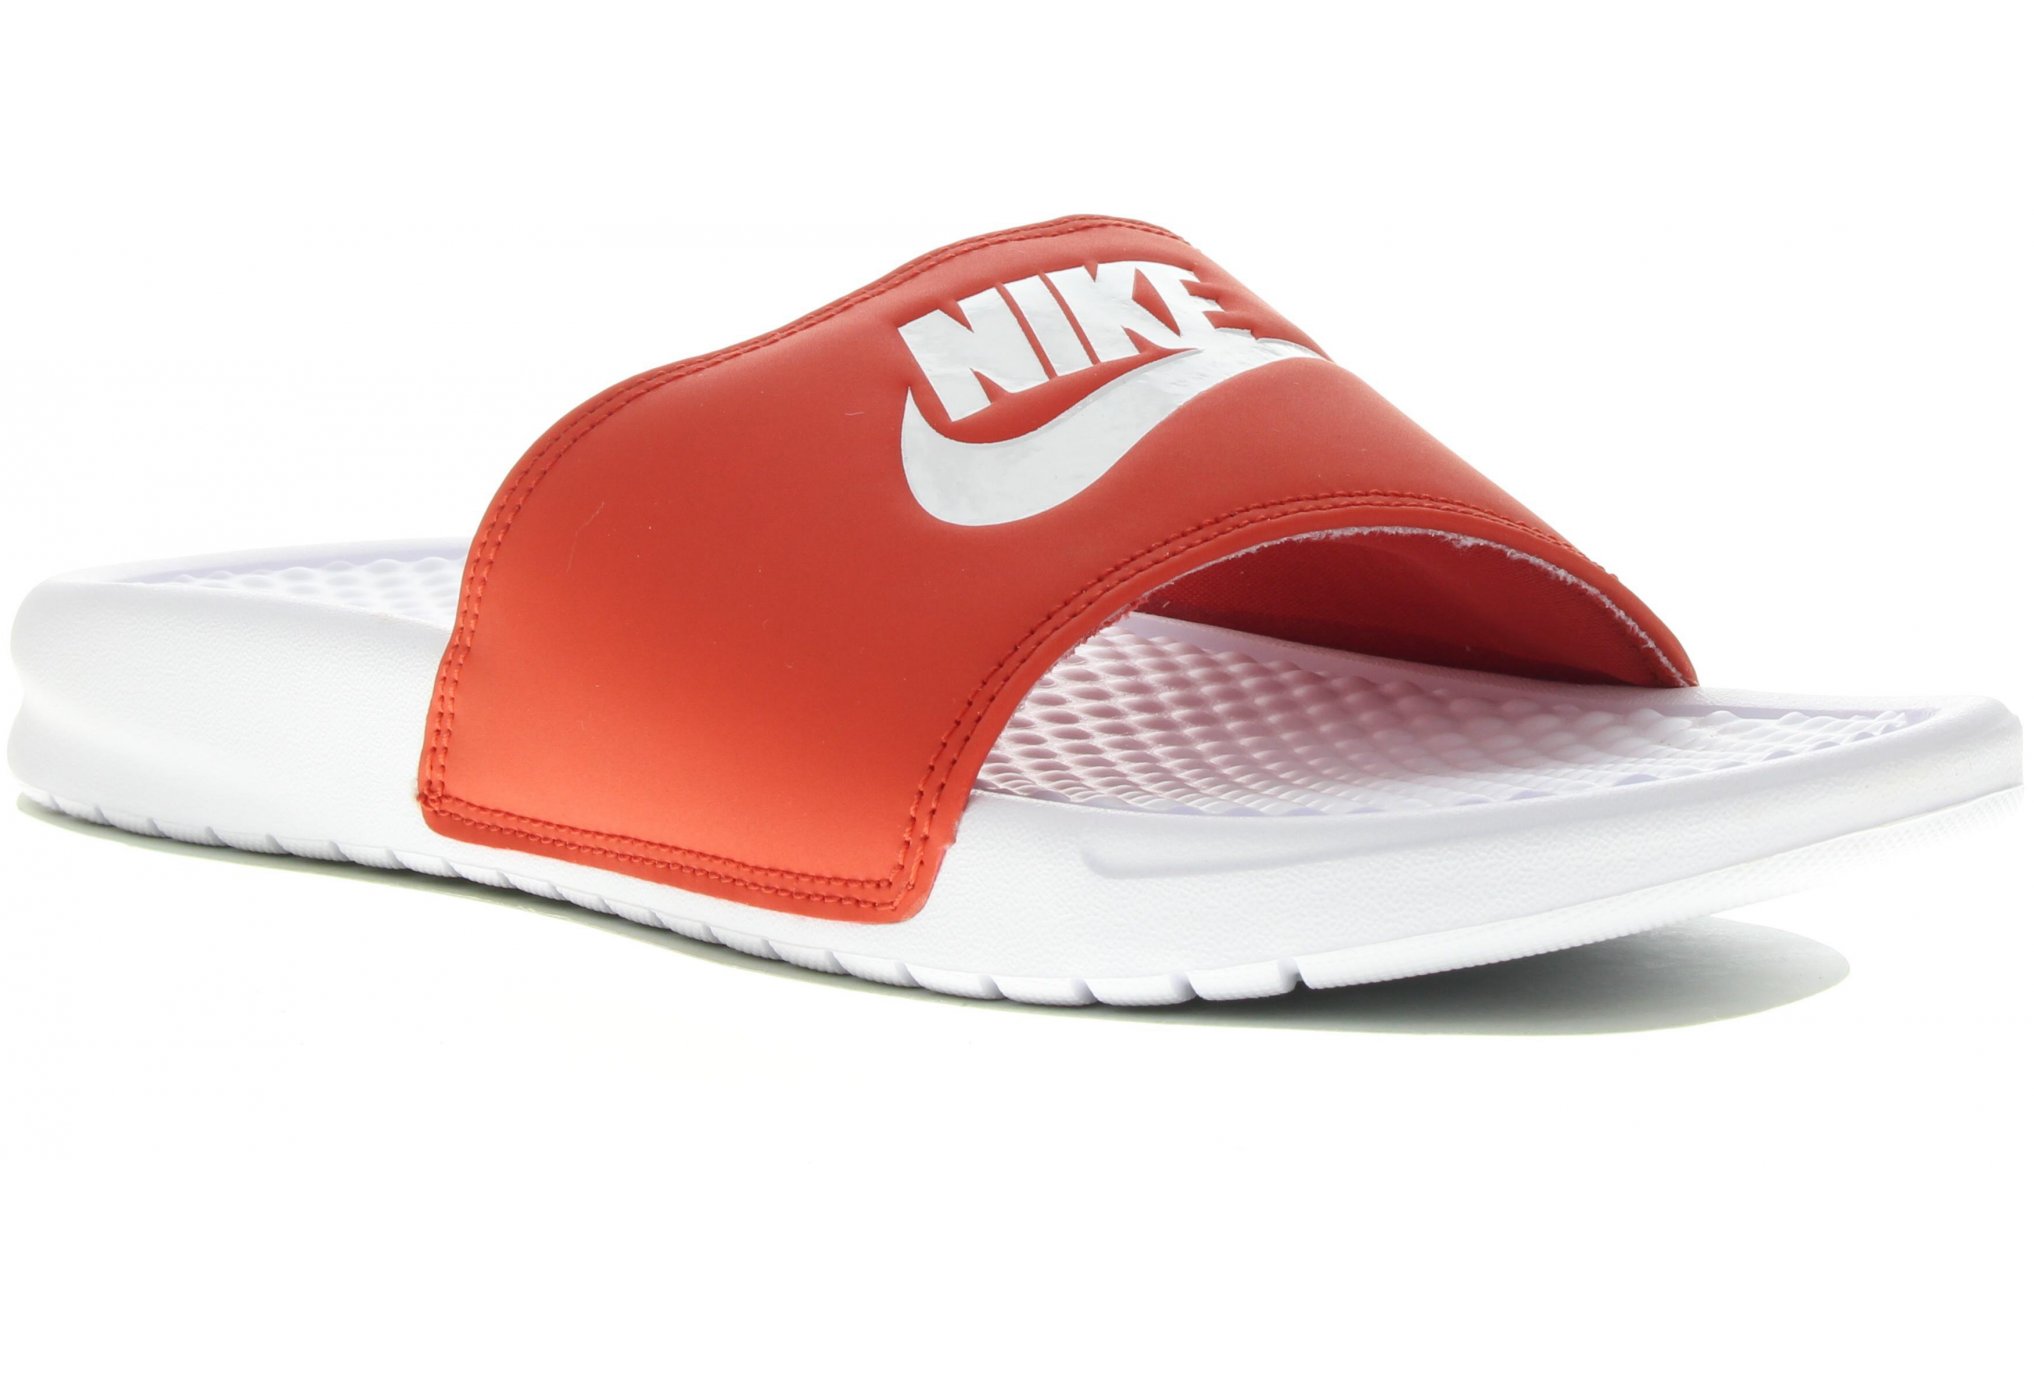 Nike Benassi jdi m dittique chaussures homme